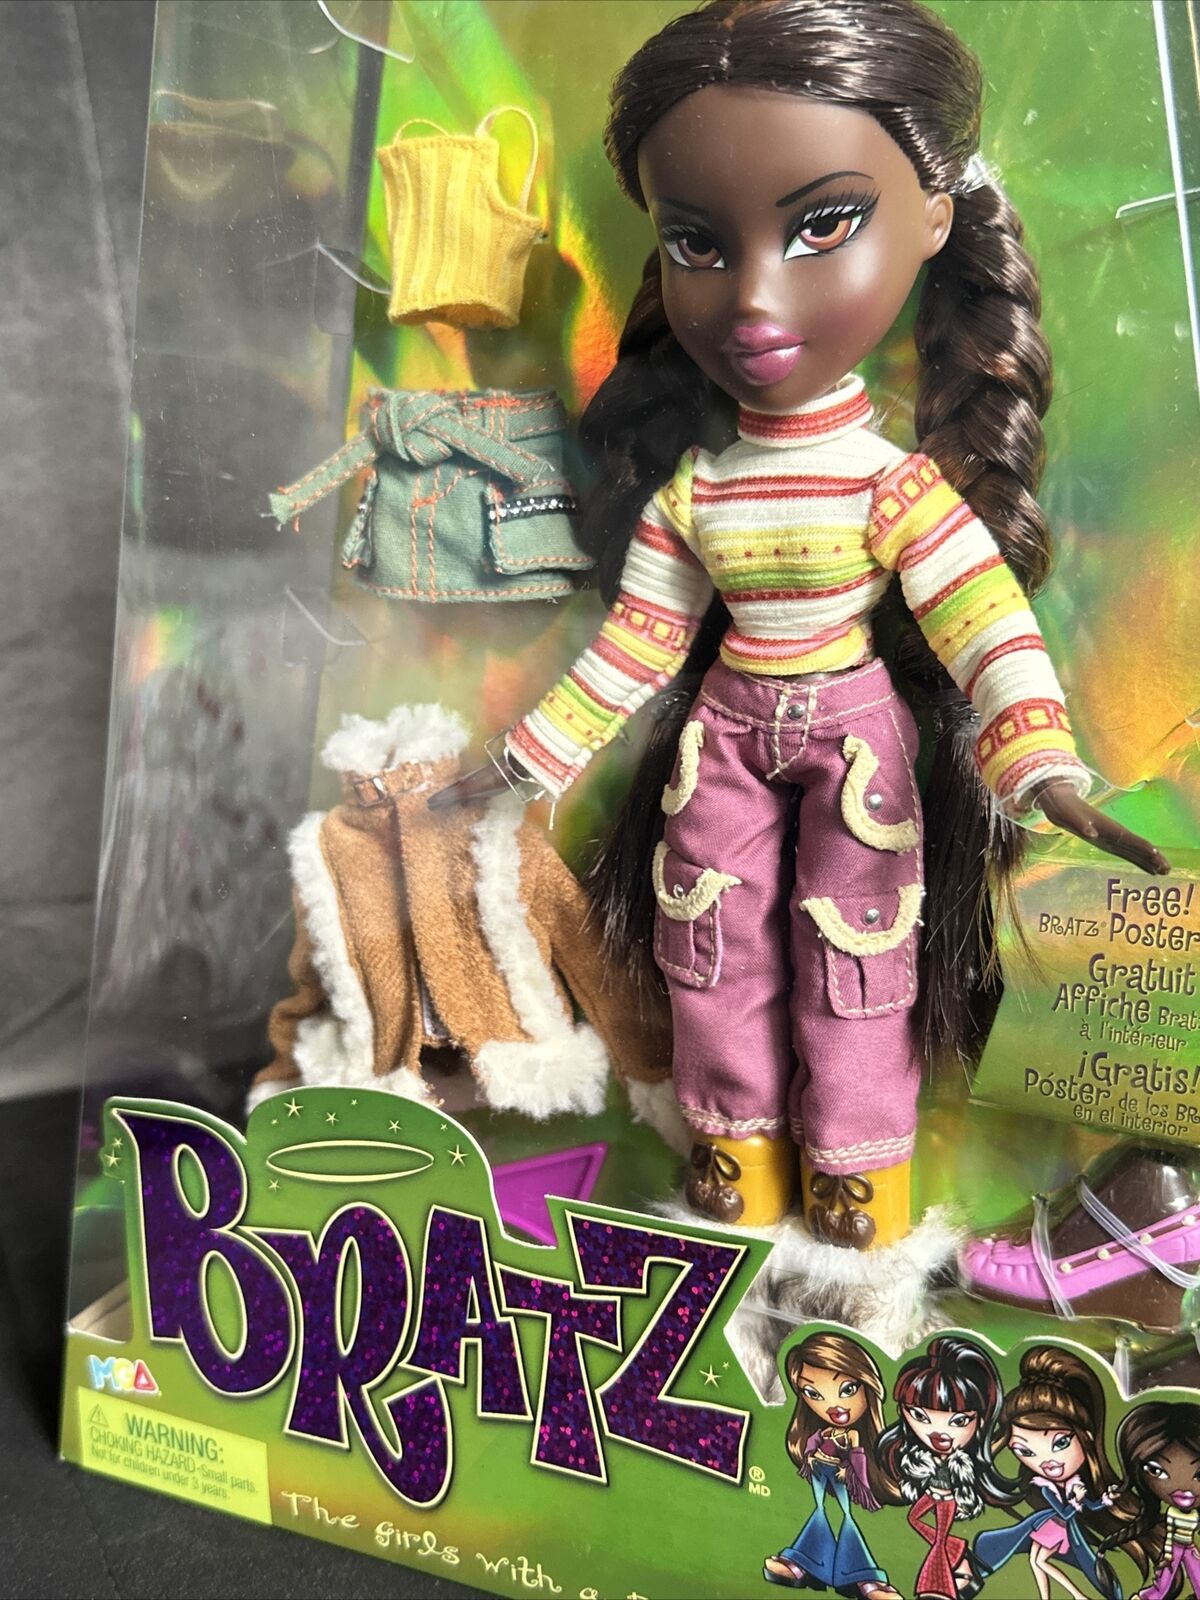 BRATZ Doll FELICIA Series 3 Repro Rare - NEW Factory Sealed Collectors Limited 